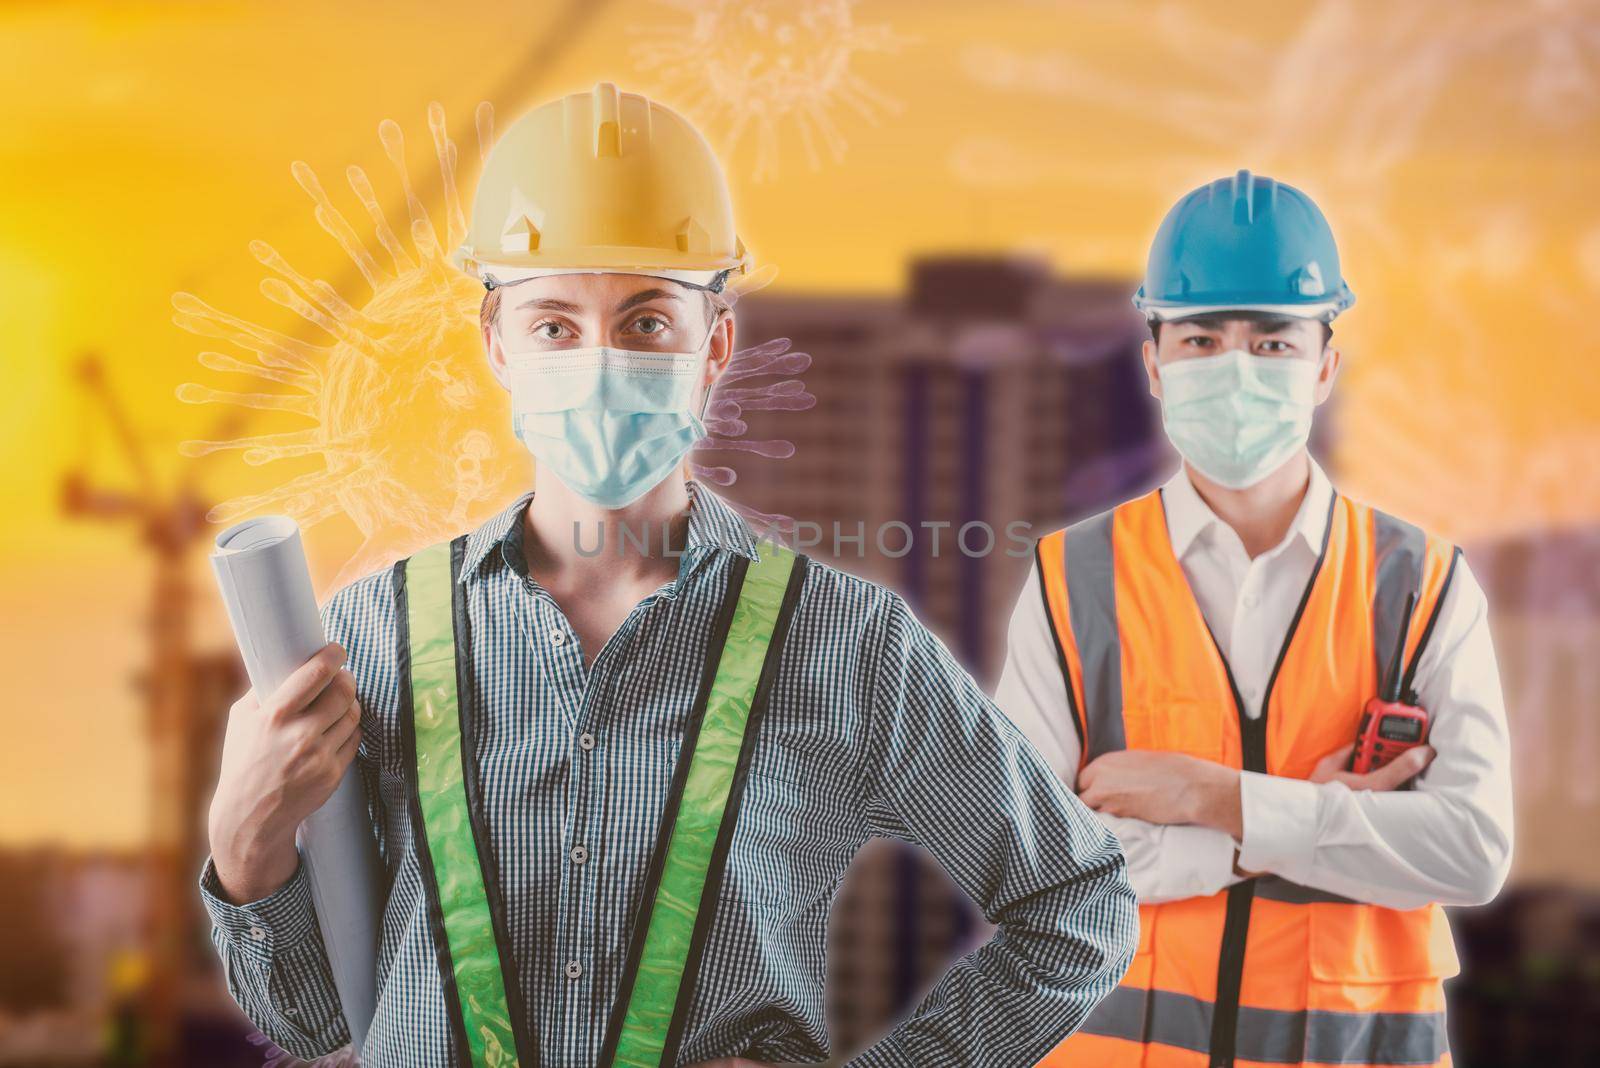 Coronavirus Covid-19 Disease Epidemic Crisis Situation, Construction Worker Standing in Line for Fever Body Scanning Thermometer Scan at Construction Site.Corona-Virus Covid19 Prevention of New Normal